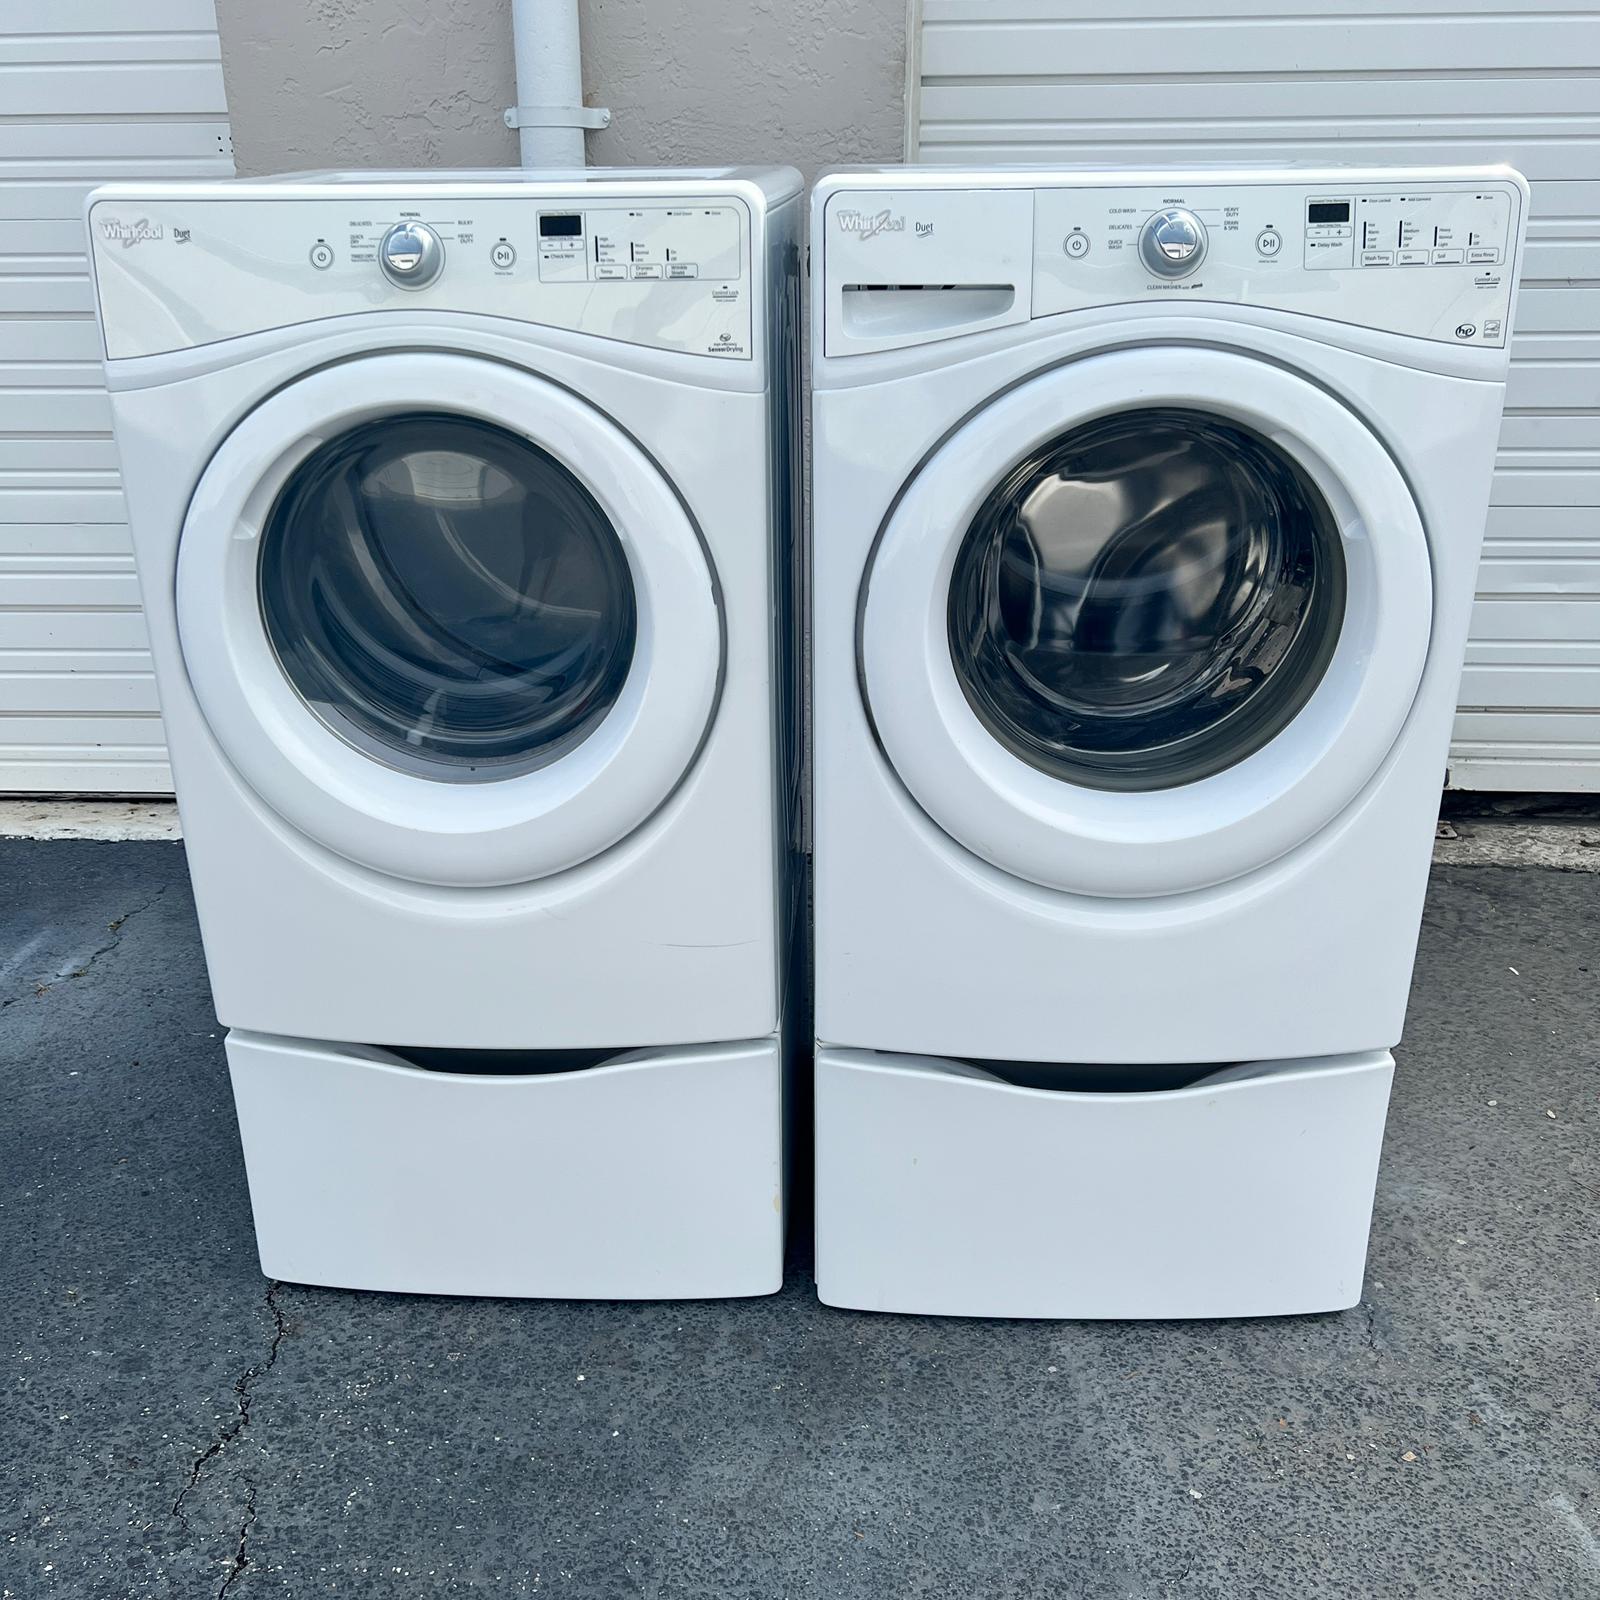 Whirlpool Washer and Dryer Front Load with Pedestal